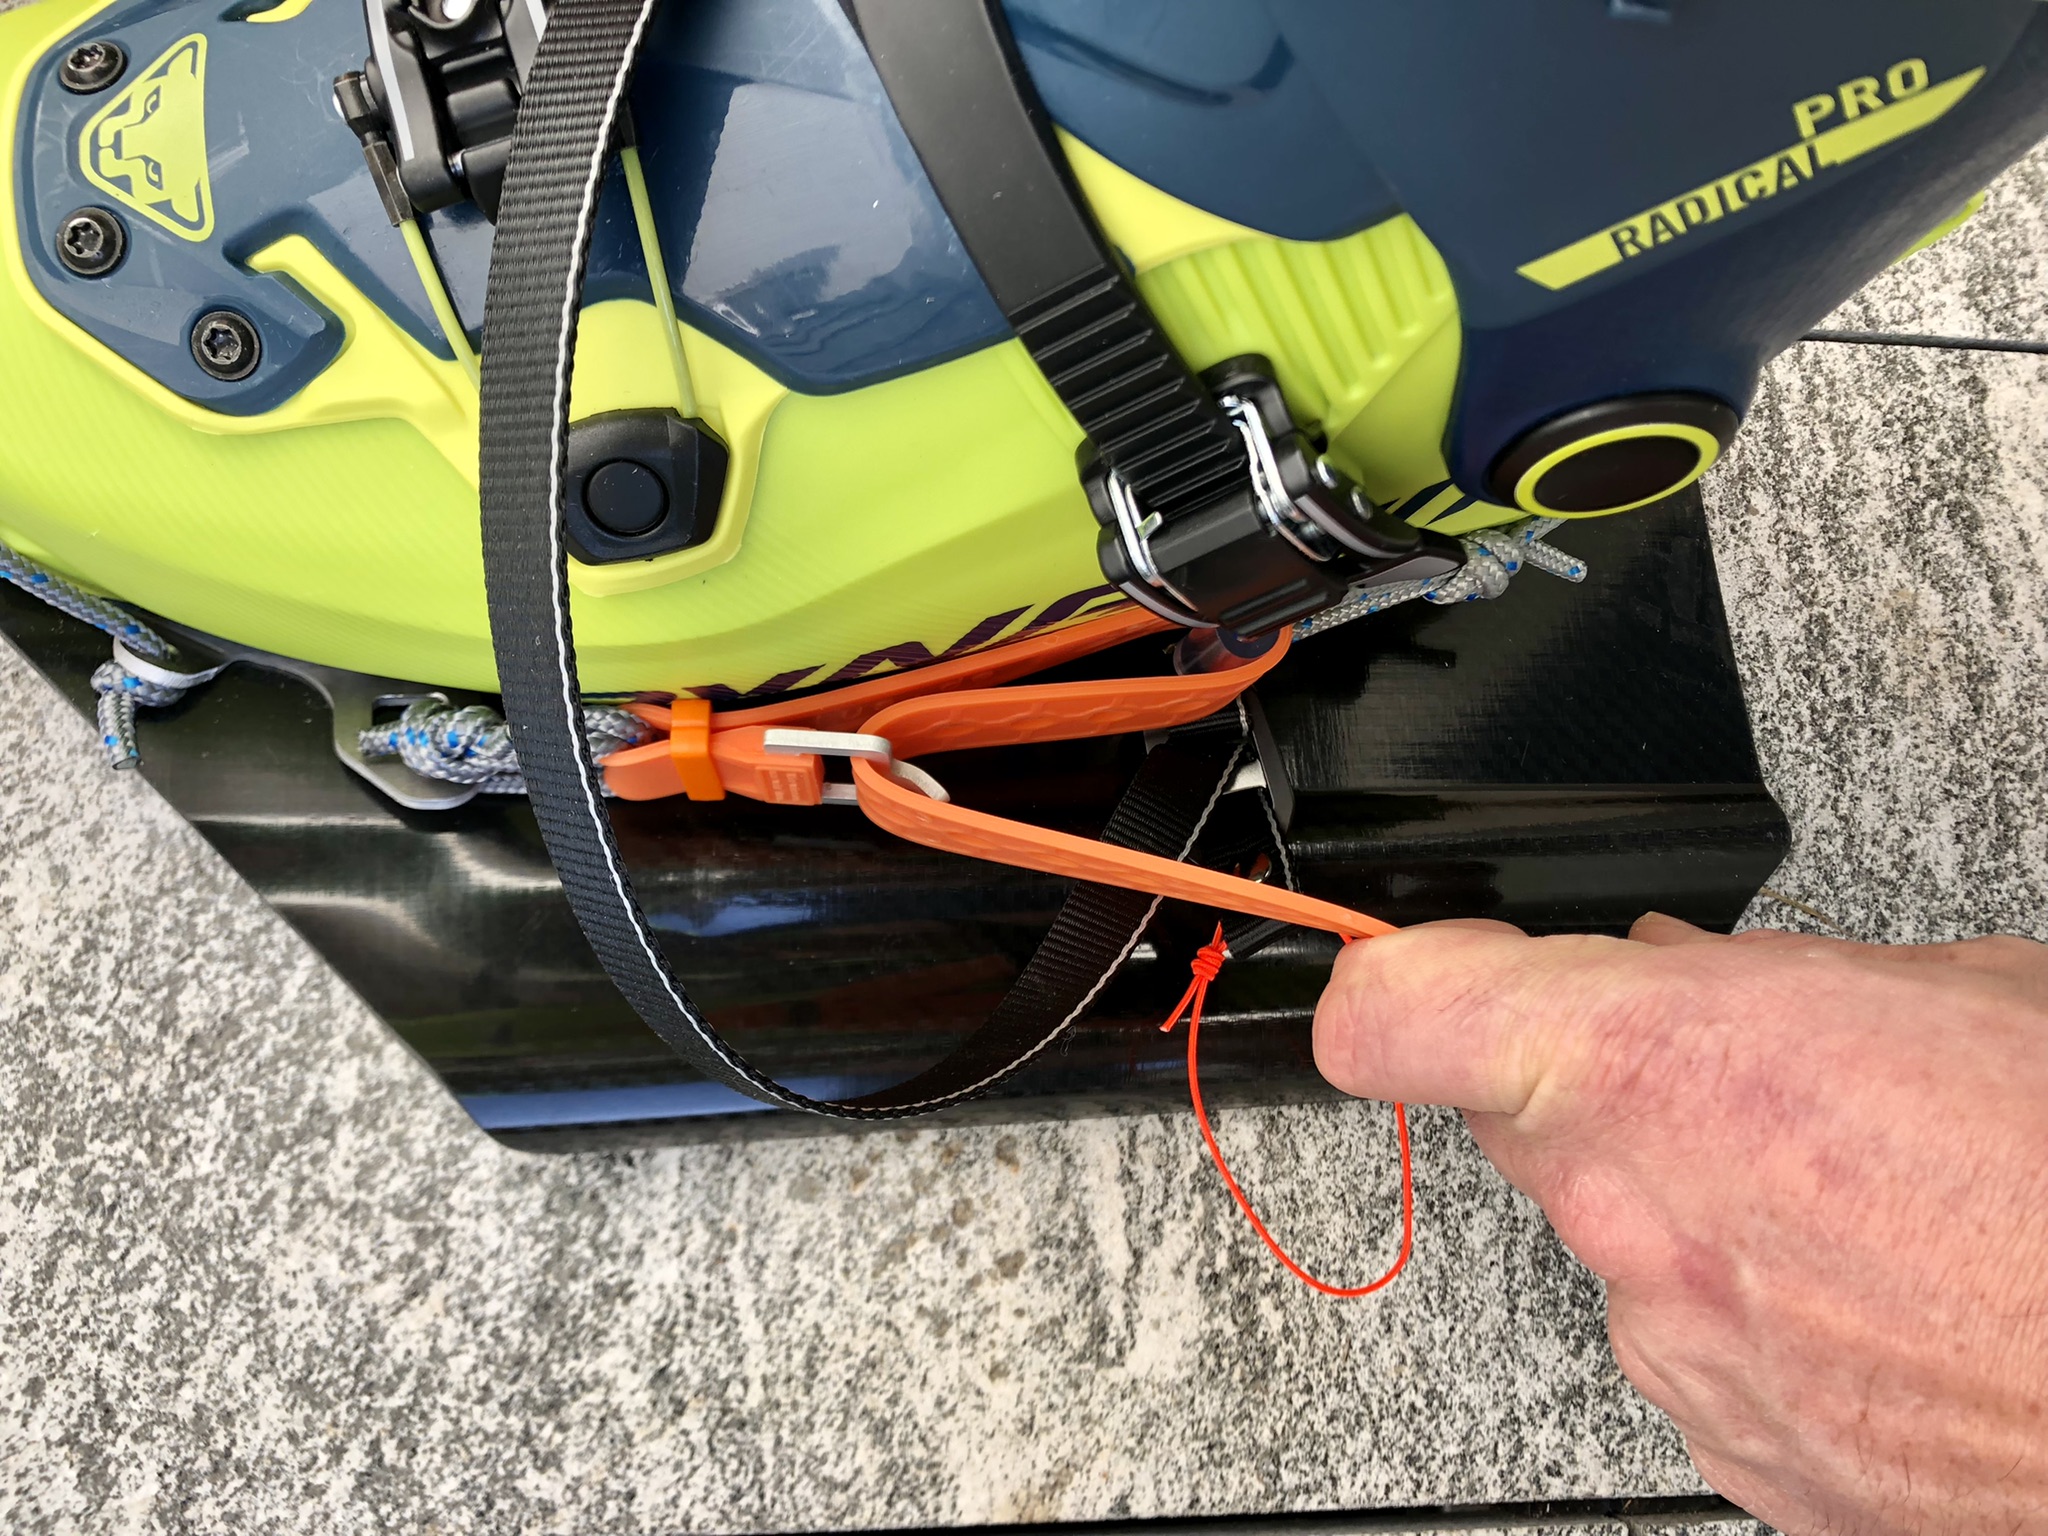 make sure there is no interference between your crampon and the plate (including the cords)!